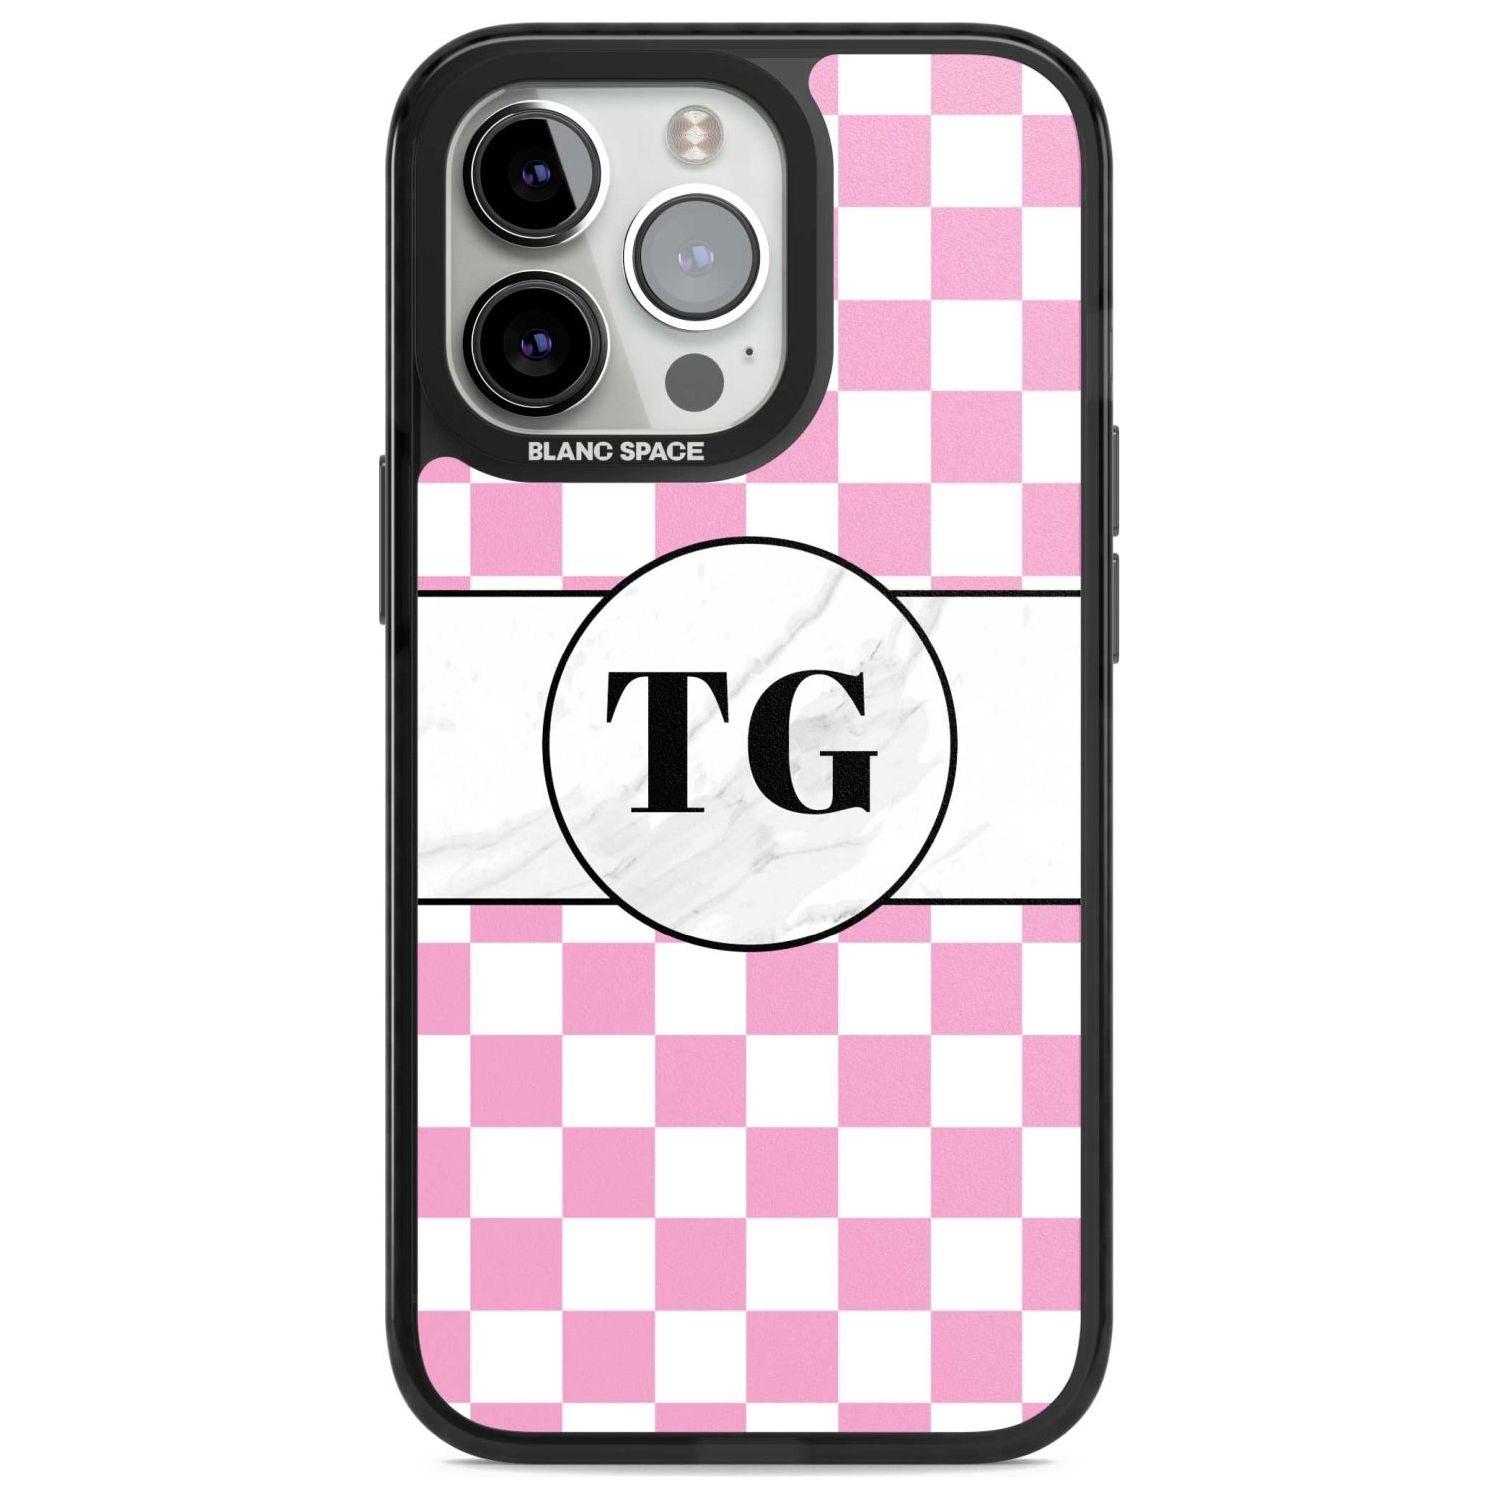 Personalised Monogrammed Pink Check Phone Case iPhone 15 Pro / Magsafe Black Impact Case,iPhone 15 Pro Max / Magsafe Black Impact Case,iPhone 14 Pro Max / Magsafe Black Impact Case,iPhone 13 Pro / Magsafe Black Impact Case,iPhone 14 Pro / Magsafe Black Impact Case Blanc Space